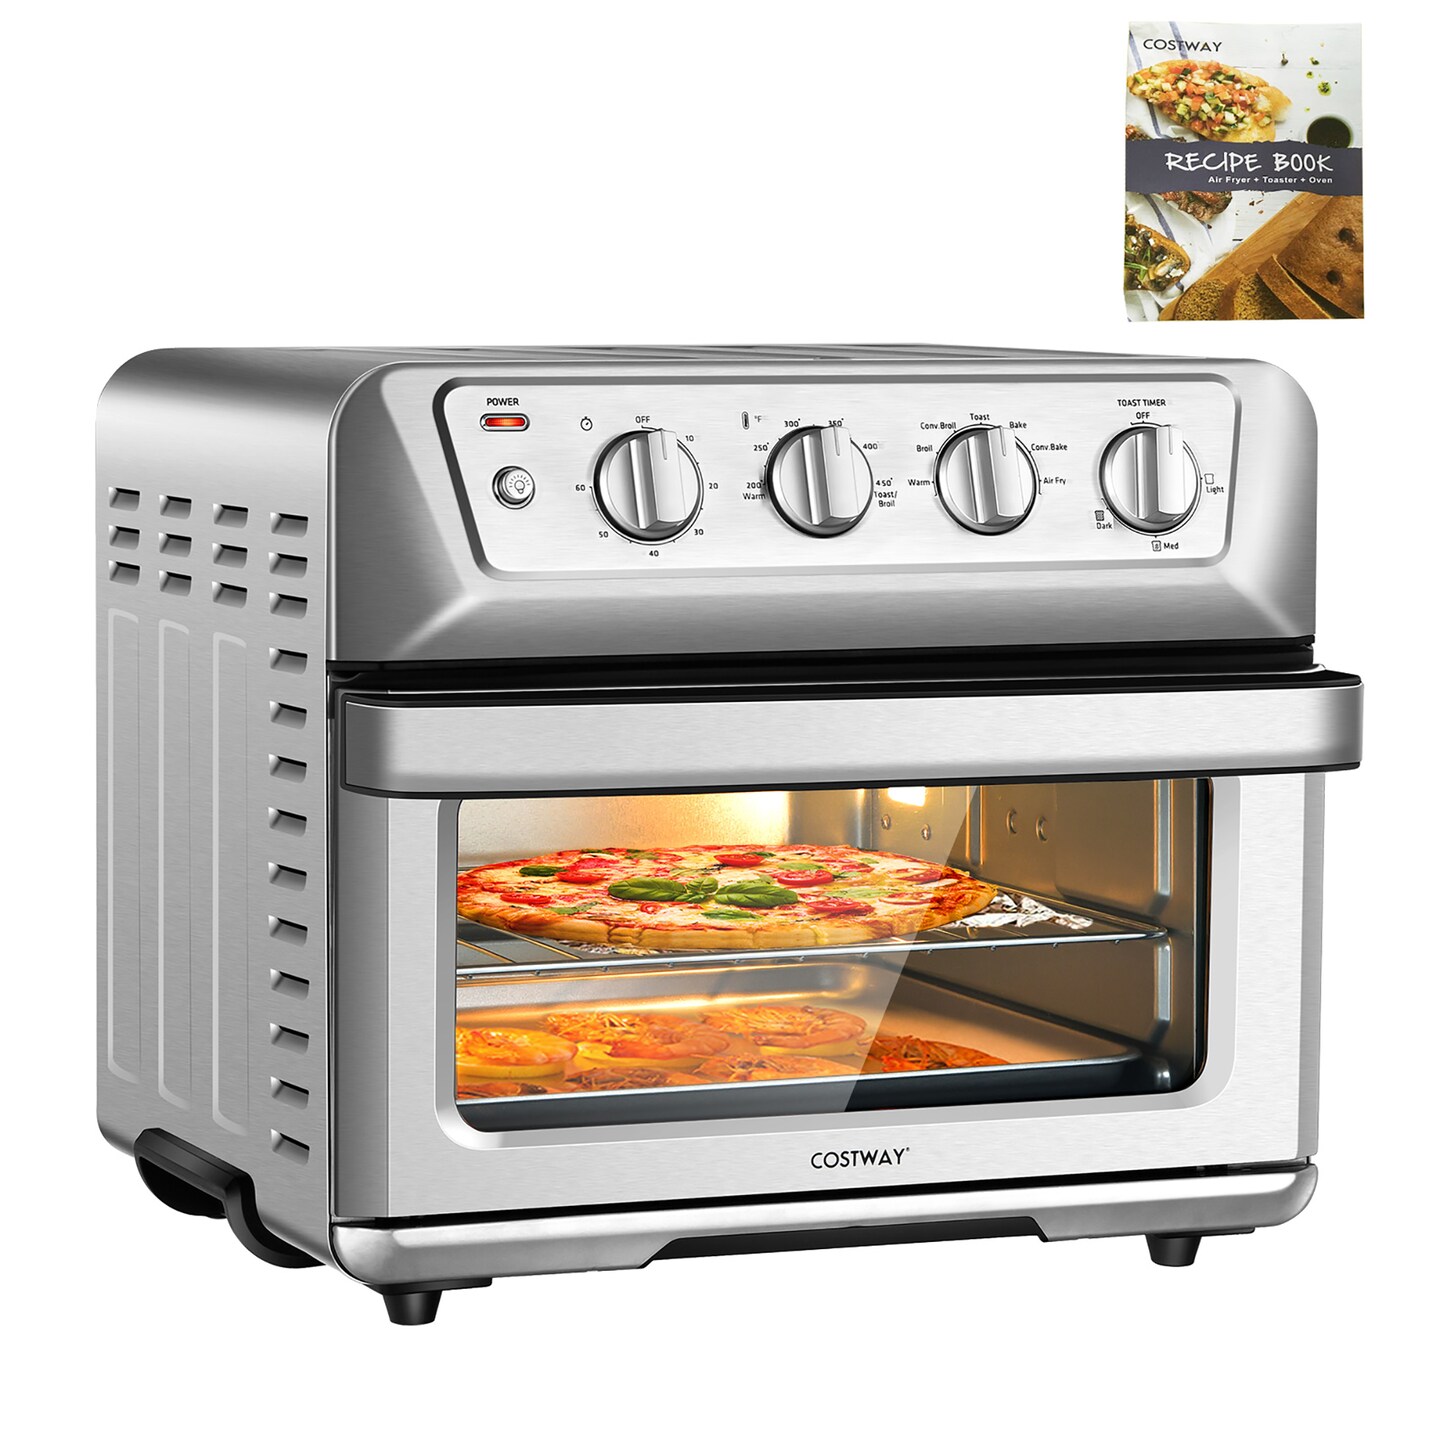 HOMCOM Air Fryer Toaster Oven, 21QT 7-In-1 Convection Oven Countertop,  Warm, Broil, Toast, Bake and Air Fry, 4 Accessories Included, 1800W,  Stainless Steel Finish